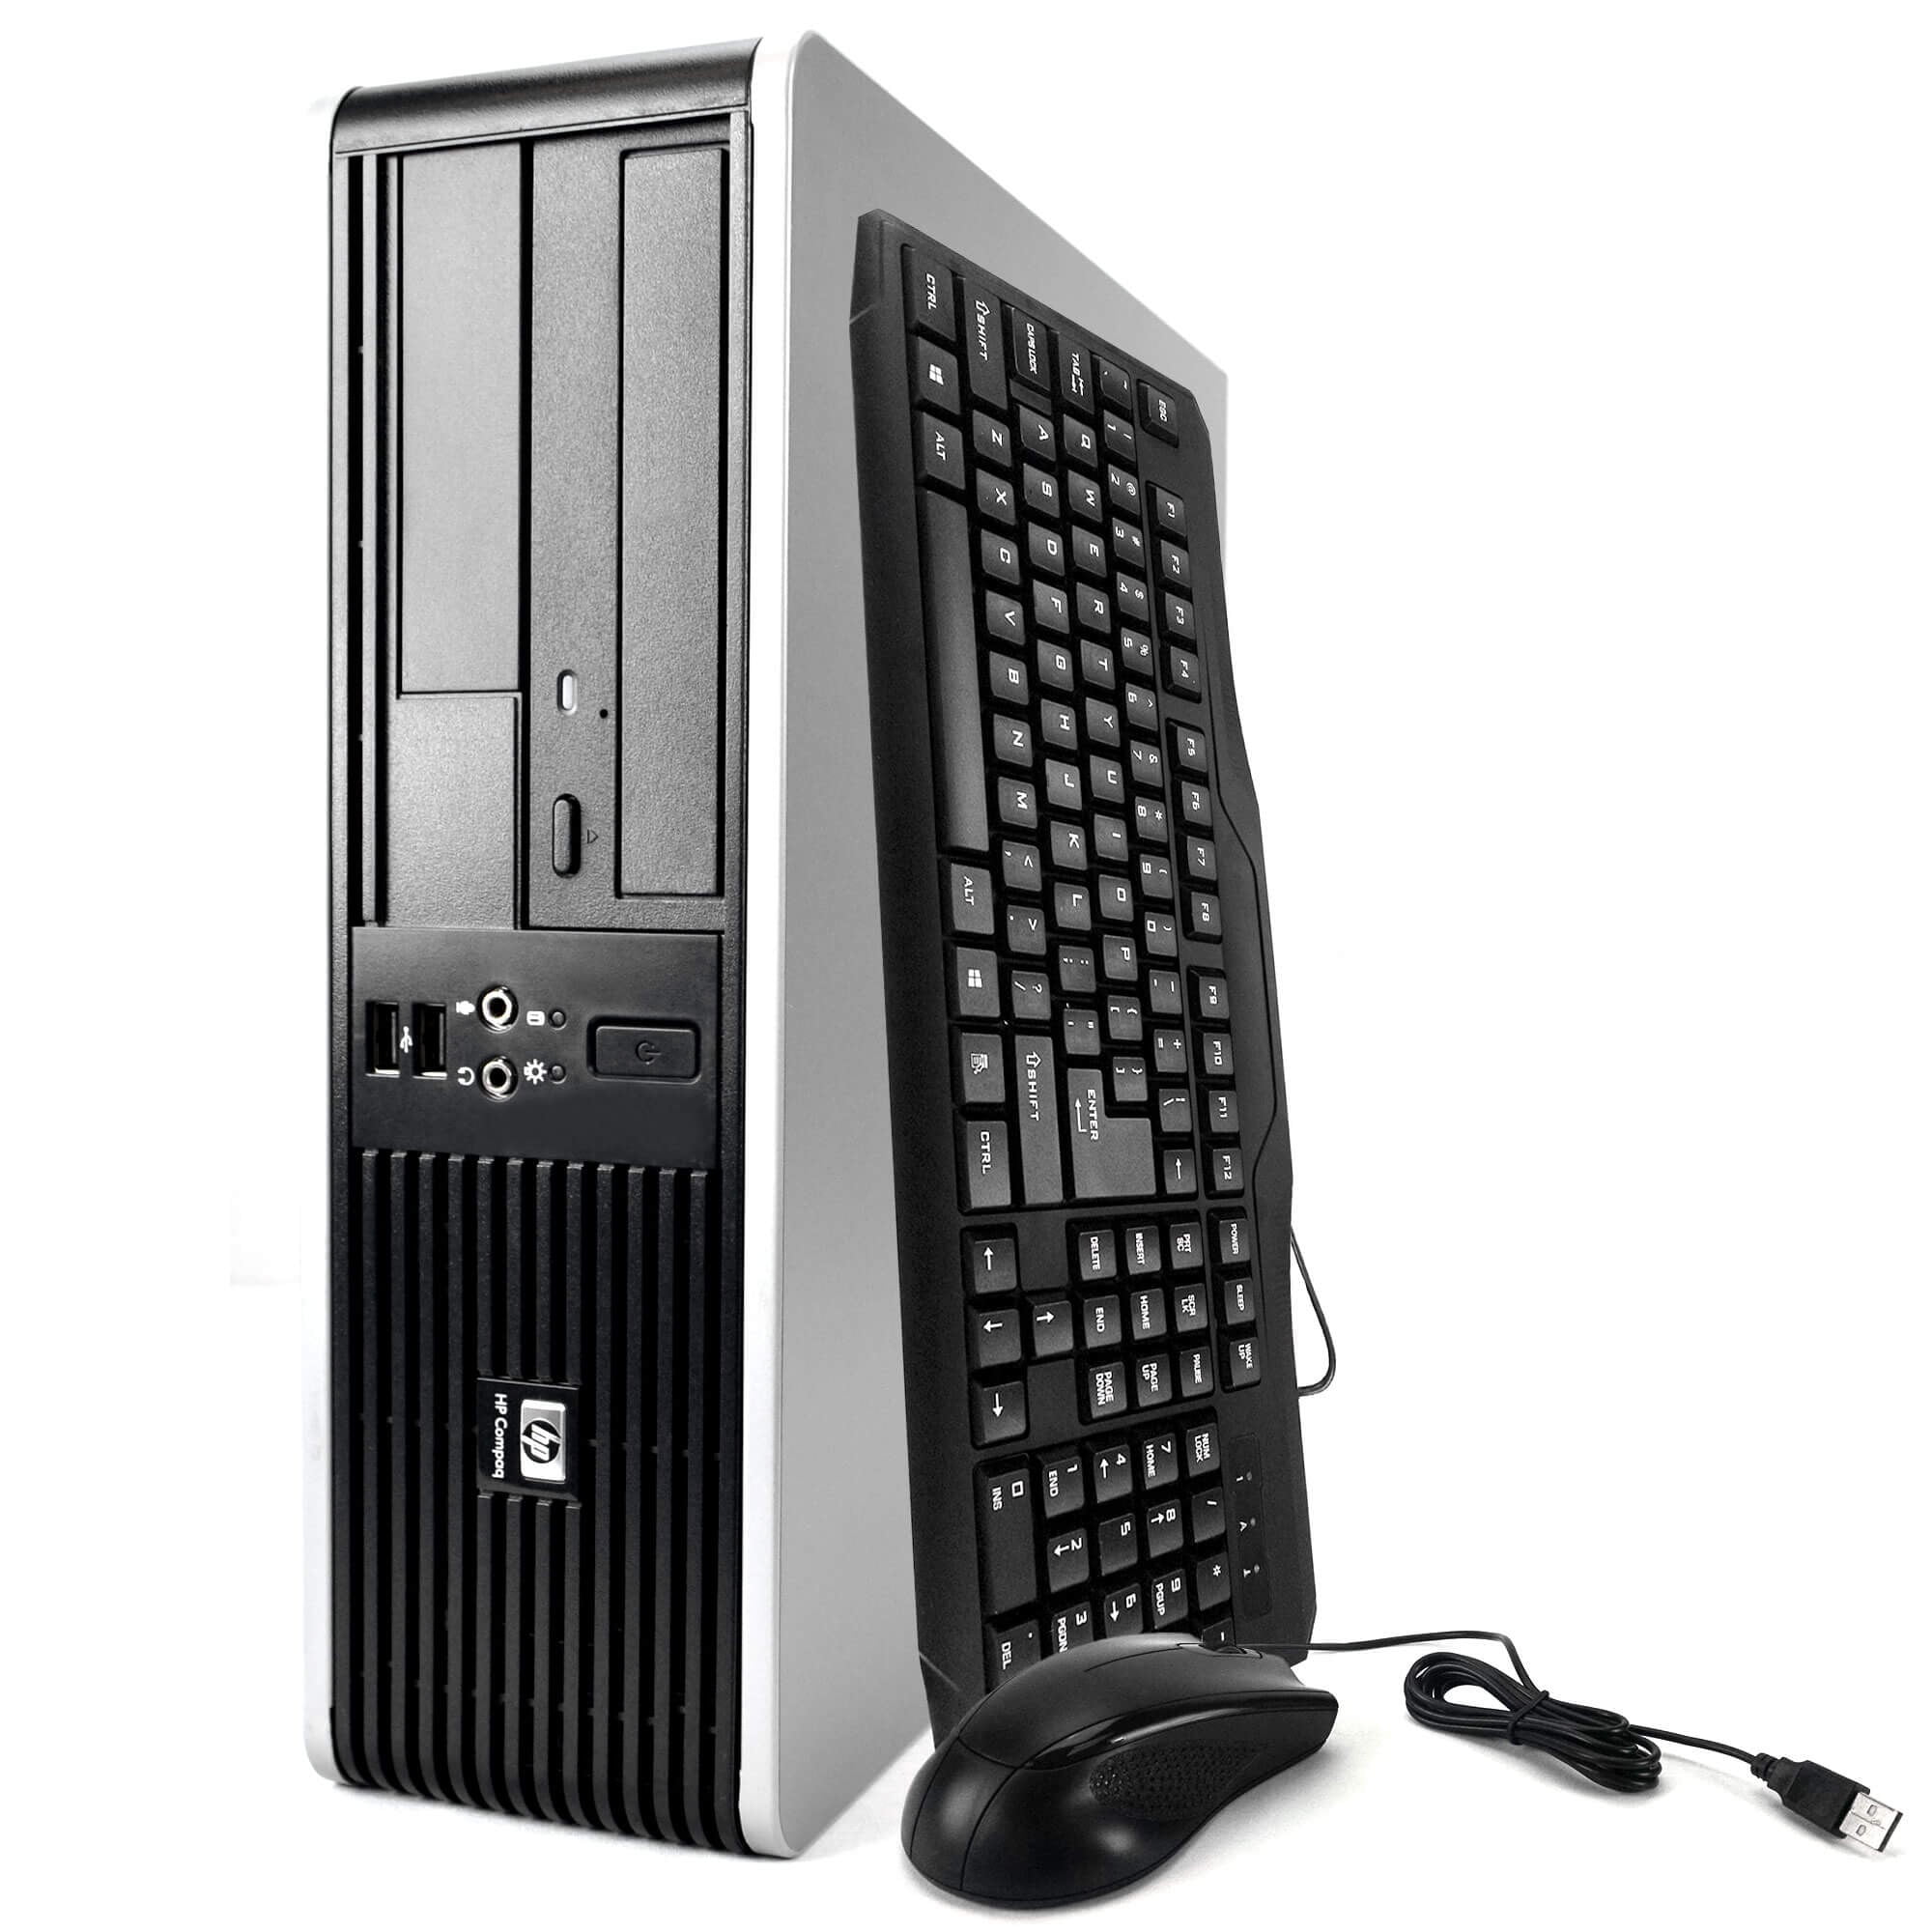 HP 7800 Elite Desktop Computer Intel Core 2 Duo 2.3GHz 8GB RAM 1TB HDD  Windows 10 Home Includes Bluetooth,WIFI,Keyboard and Mouse